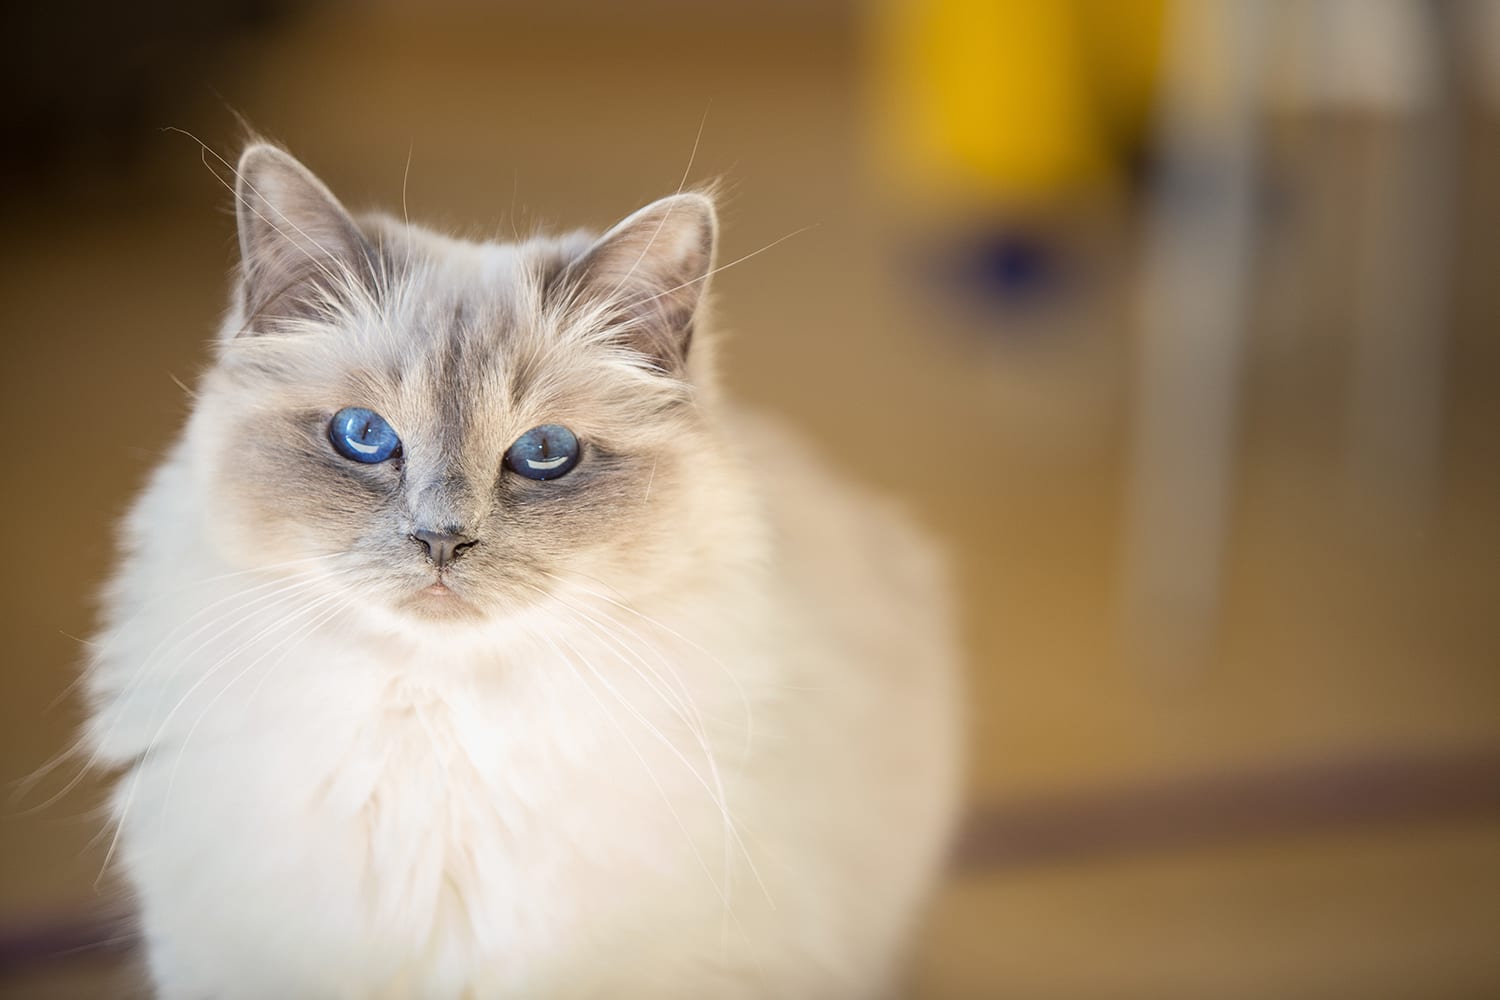 Light coloured, long haired cat with blue eyes looking into camera. Yellow room behind.